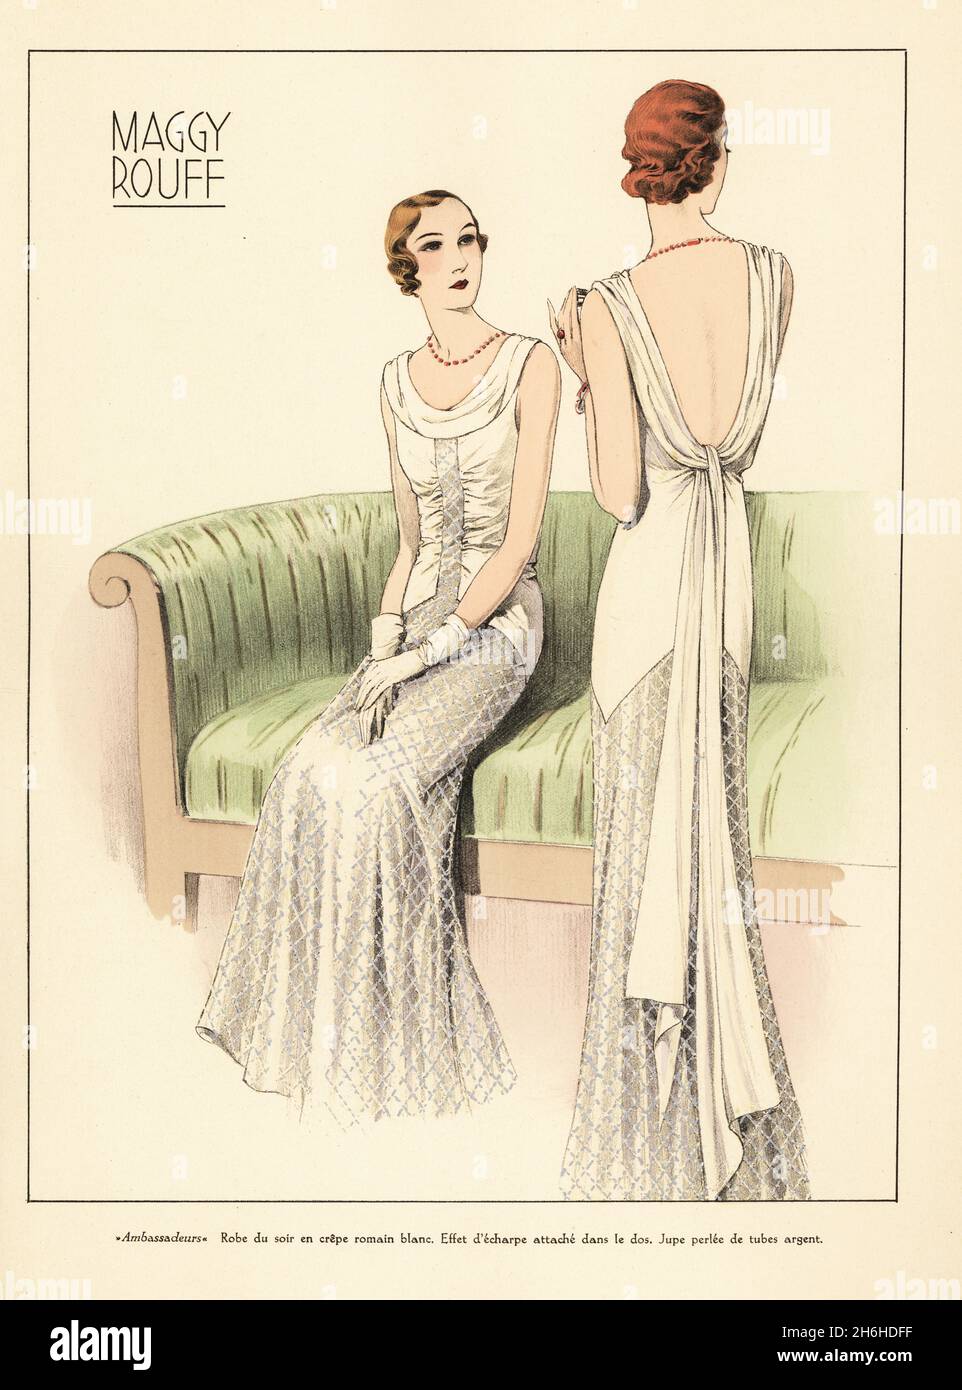 Evening dress in white Romaine crepe, tied with scarf at the back, Ambassadeurs. Marcel wave bob hairstyle. Fashion designs by Maggy Rouff., Belgian-born fashion and costume designer. Handcoloured pochoir lithograph from La Grande Couture, Creations pour la Femme Mondaine, Atelier Bachwitz, publisher of Chic Parisien, Vienna, September, 1931. Stock Photo